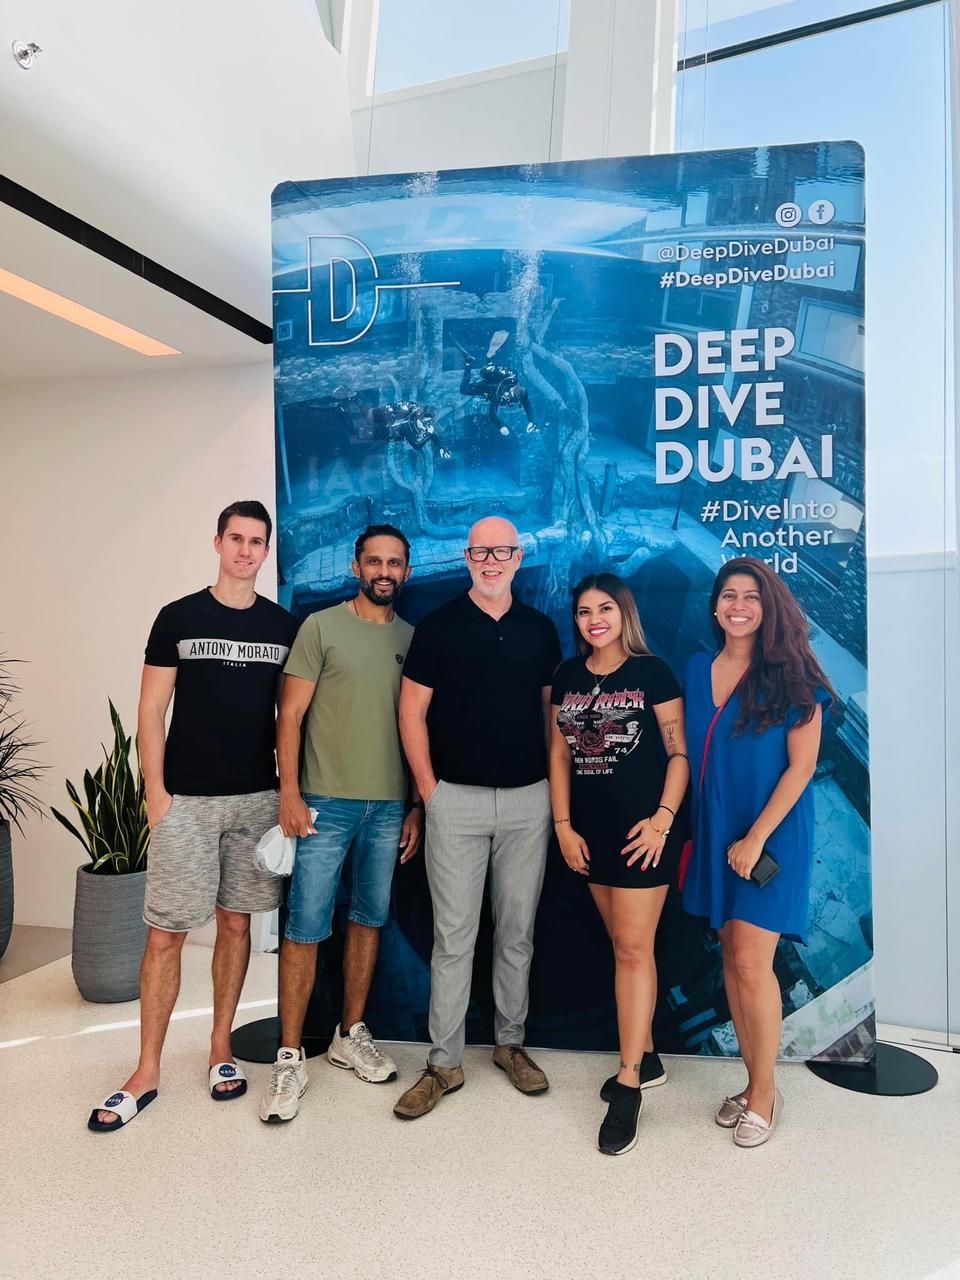 Deep Dive Dubai Challenge yourself The deepest pool in the world